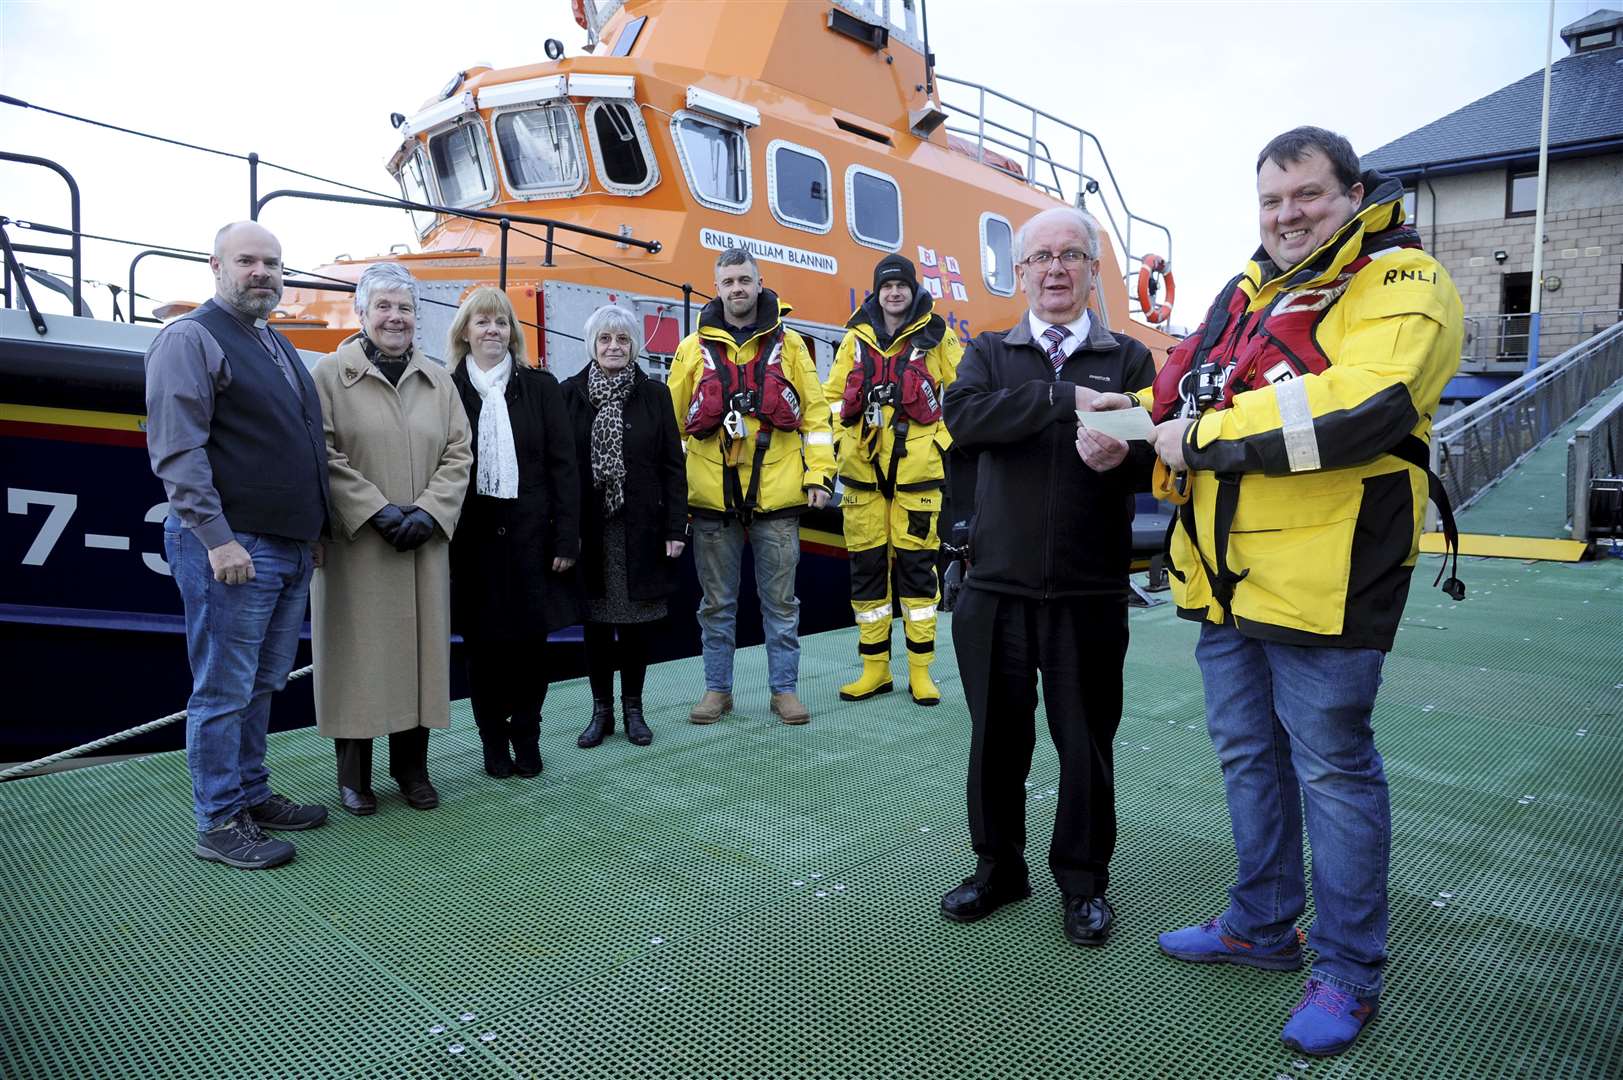 Buckie RNLI lifeboat coxswain Alan Robertson (right) accepts a cheque for £1300 from South and West Church events committee member Gordon Pirie. Joining them are (from left) Rev Wes Brandon, Janice Dawson and Mary Stephen (all South and West Church) as well as lifeboat crew Brian Forbes and Jordan Campbell. Picture: Eric Cormack